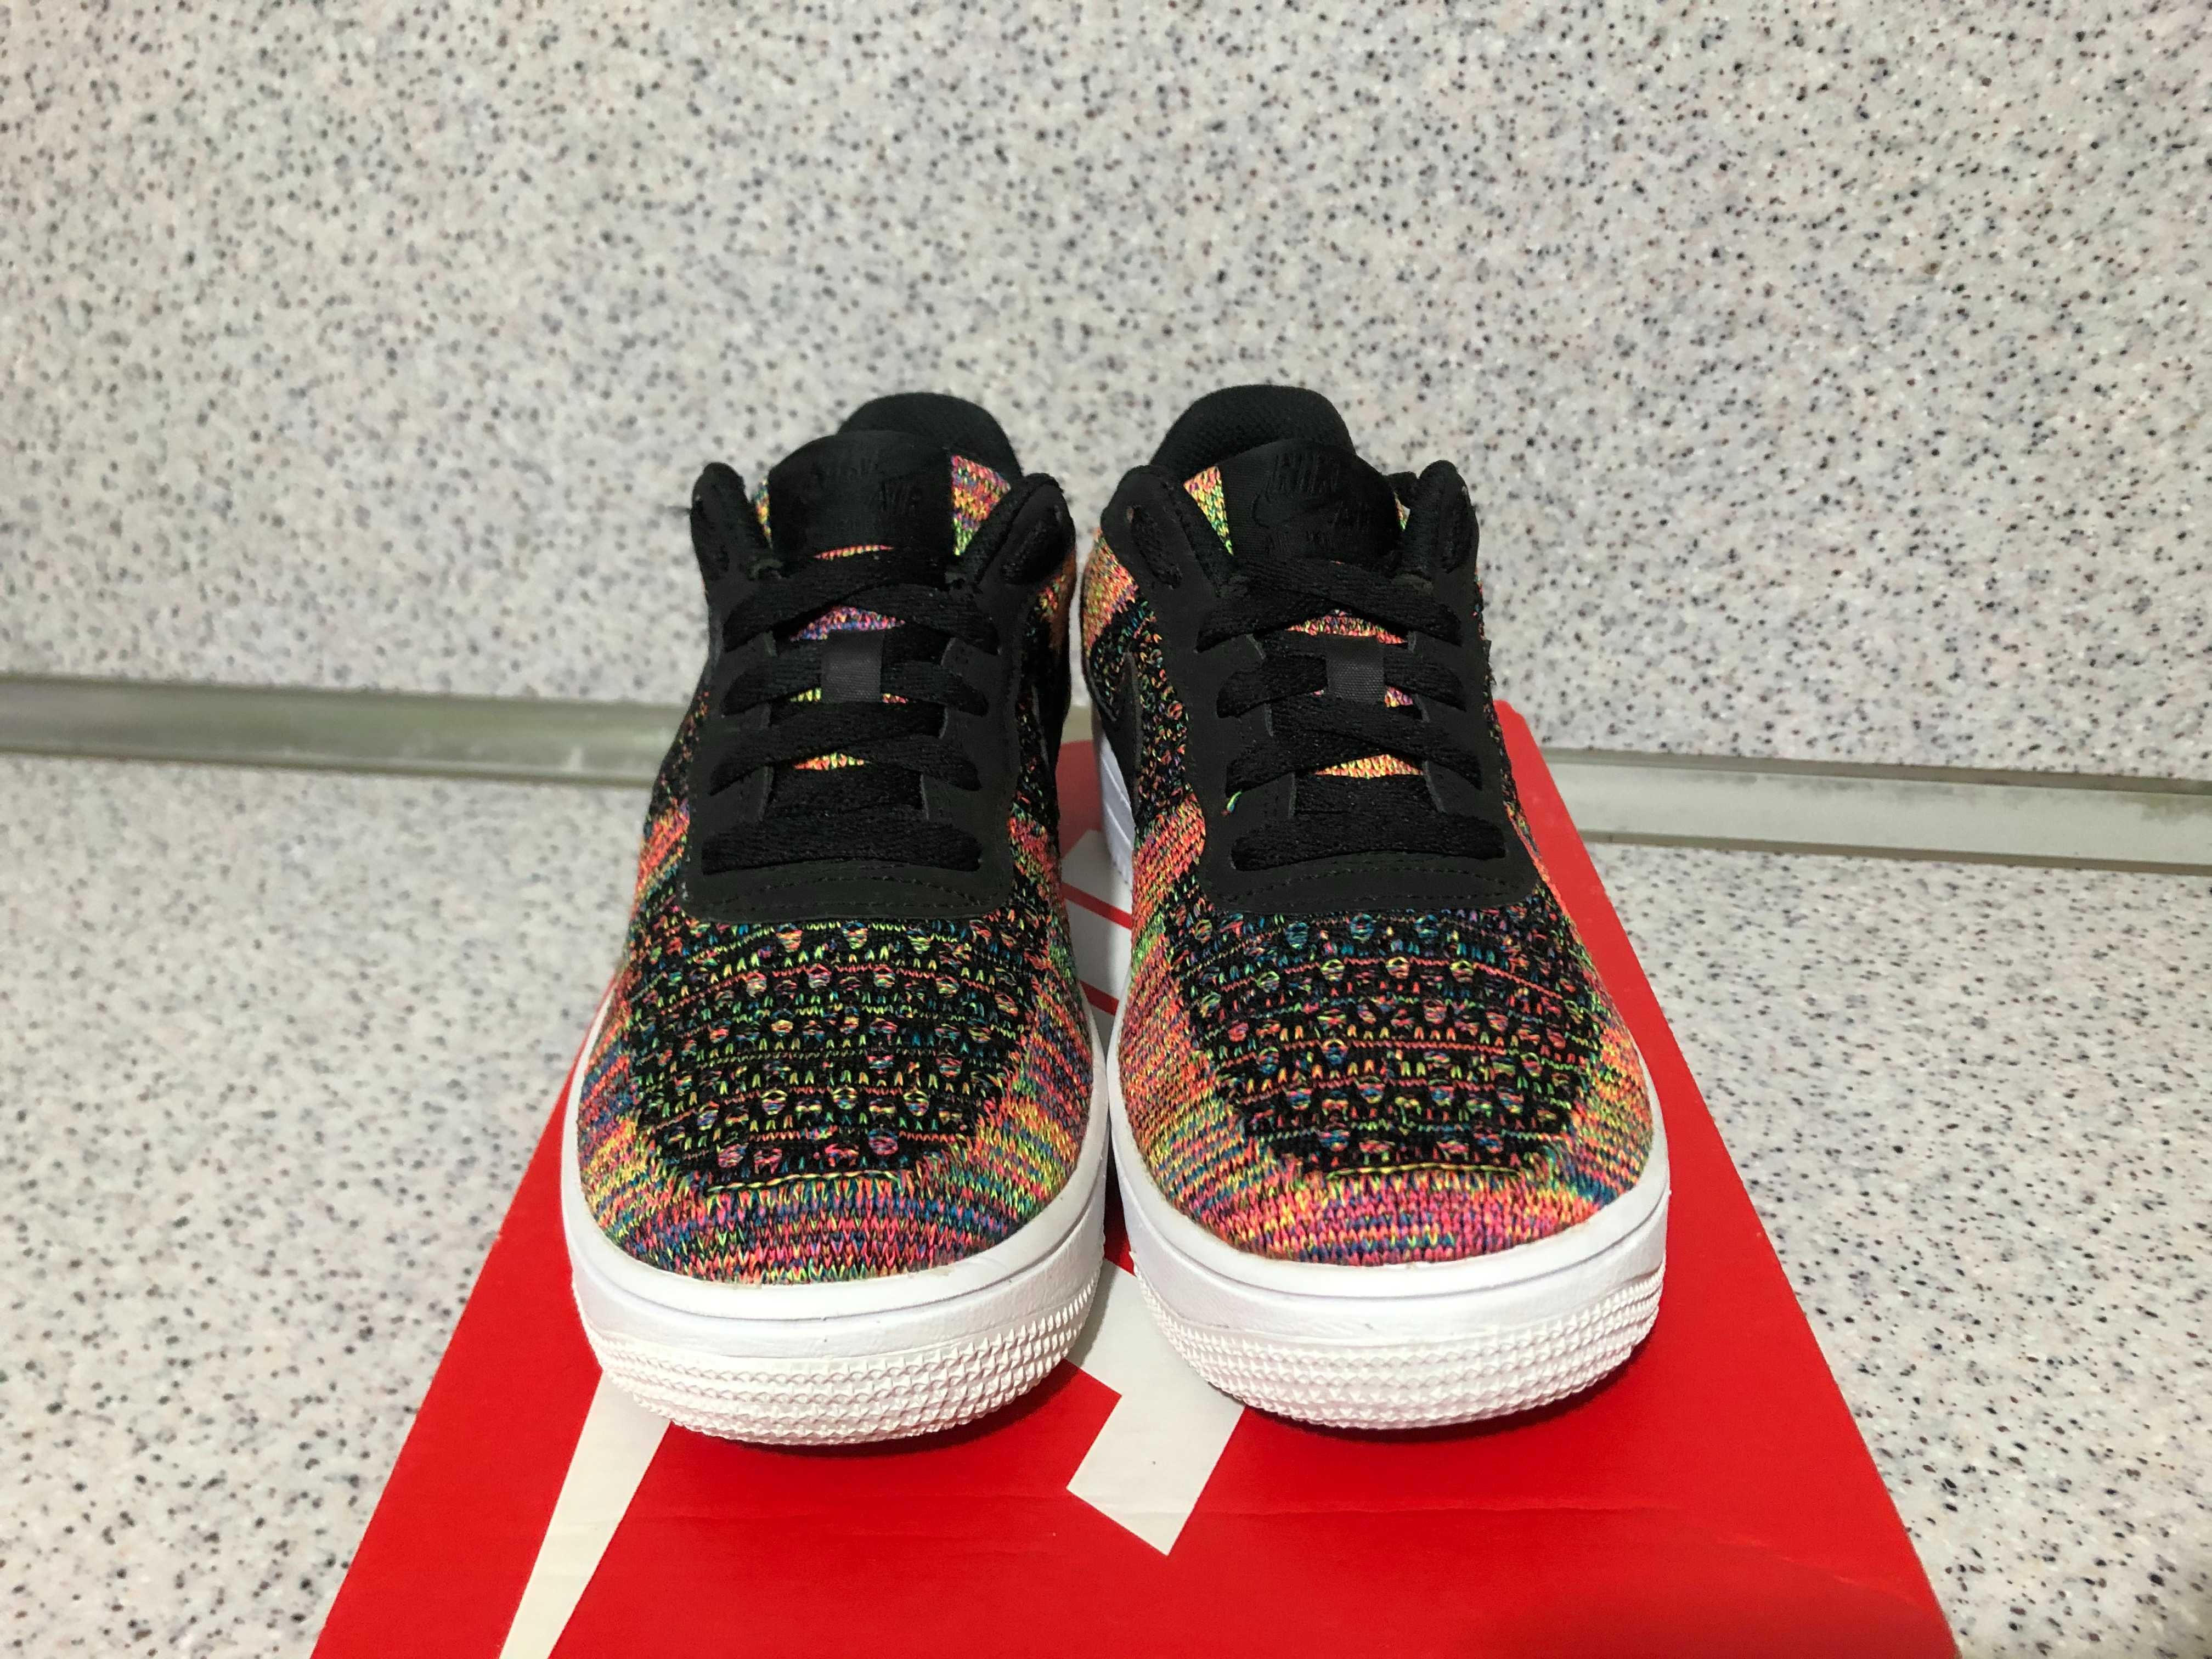 ОРИГИНАЛНИ *** Nike Air Force 1 Flyknit 2.0 / Hyper Pink Multicolor